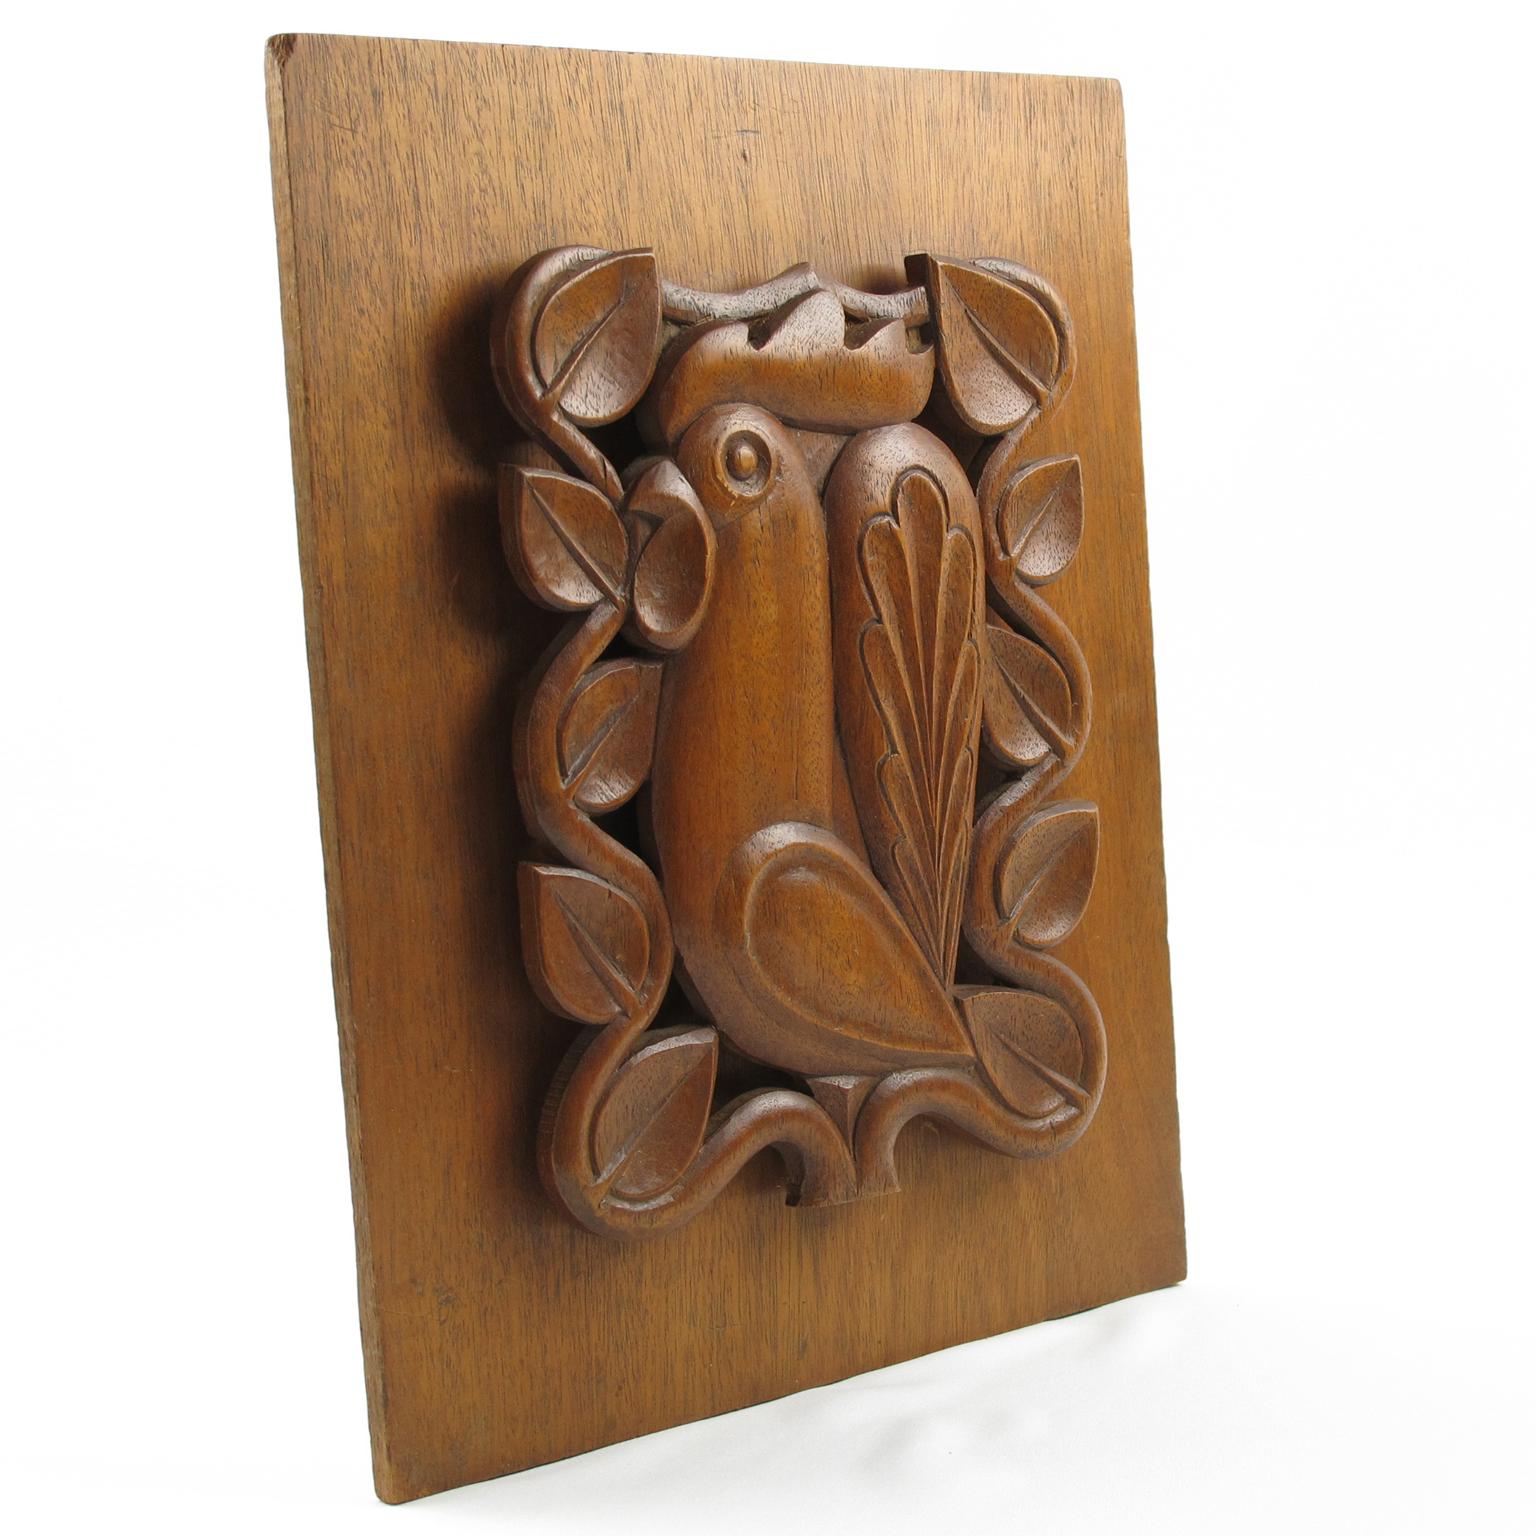 Mid-Century Modern 1950s Modernist Wooden Wall Art Sculpture Carved Rooster Panel